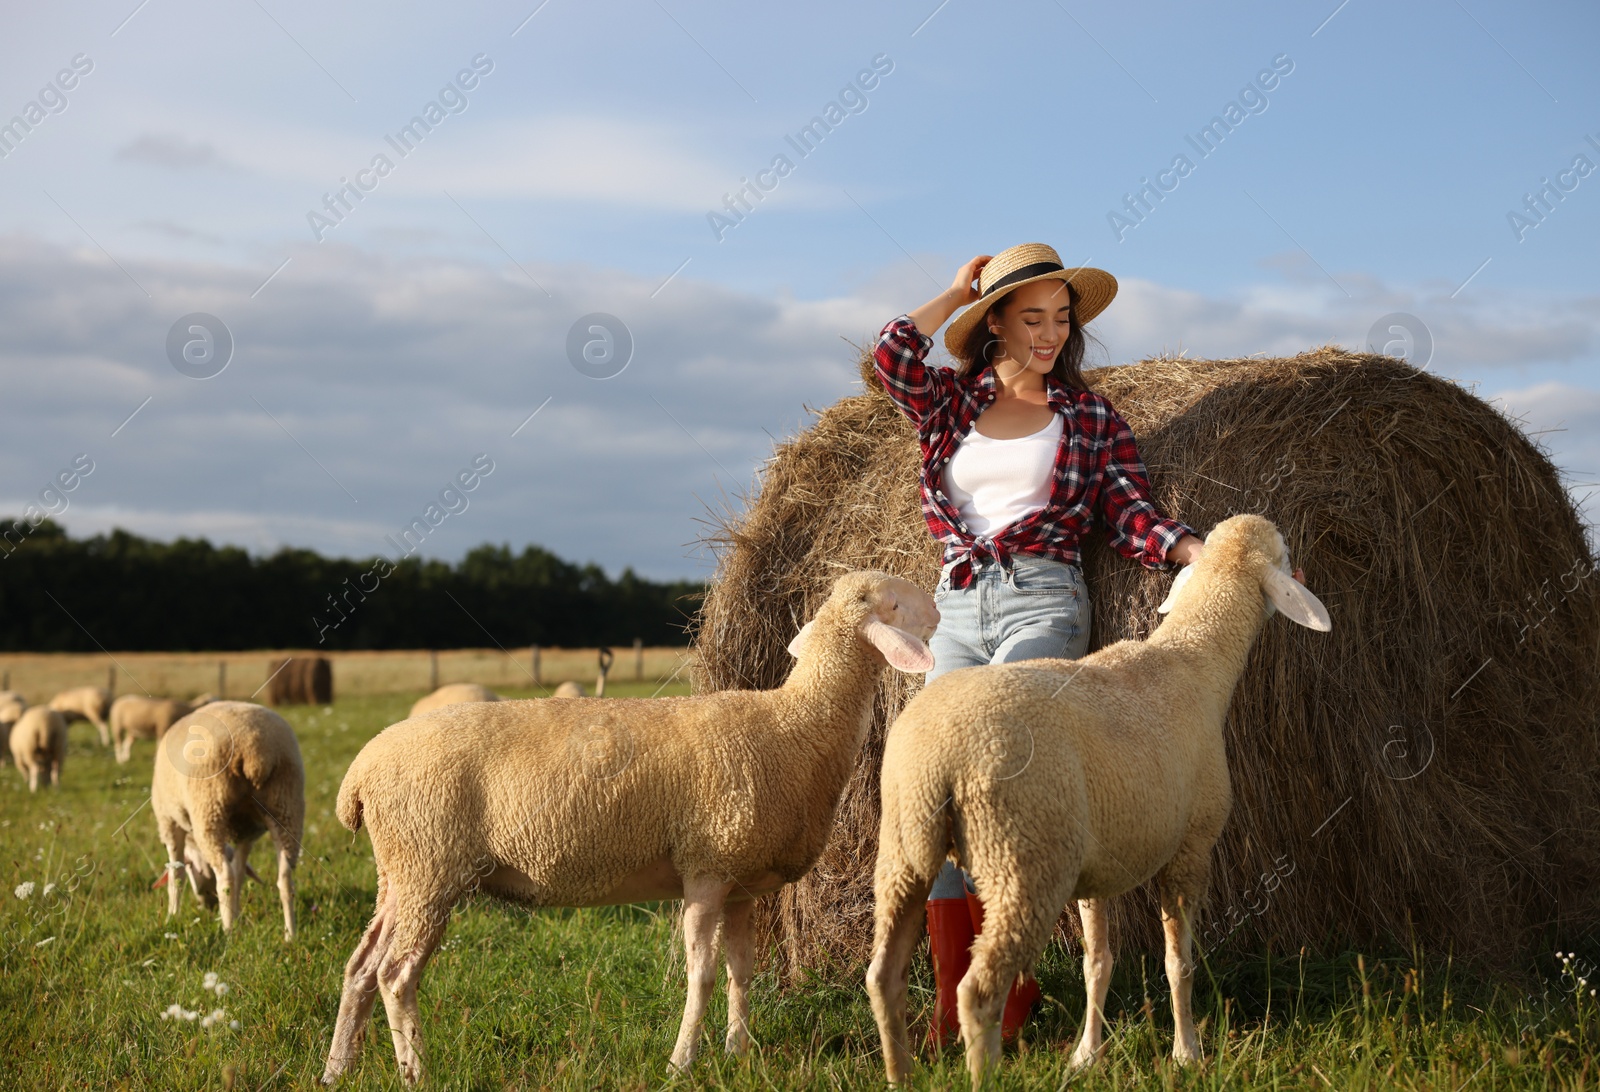 Photo of Smiling woman and sheep near hay bale on animal farm. Space for text